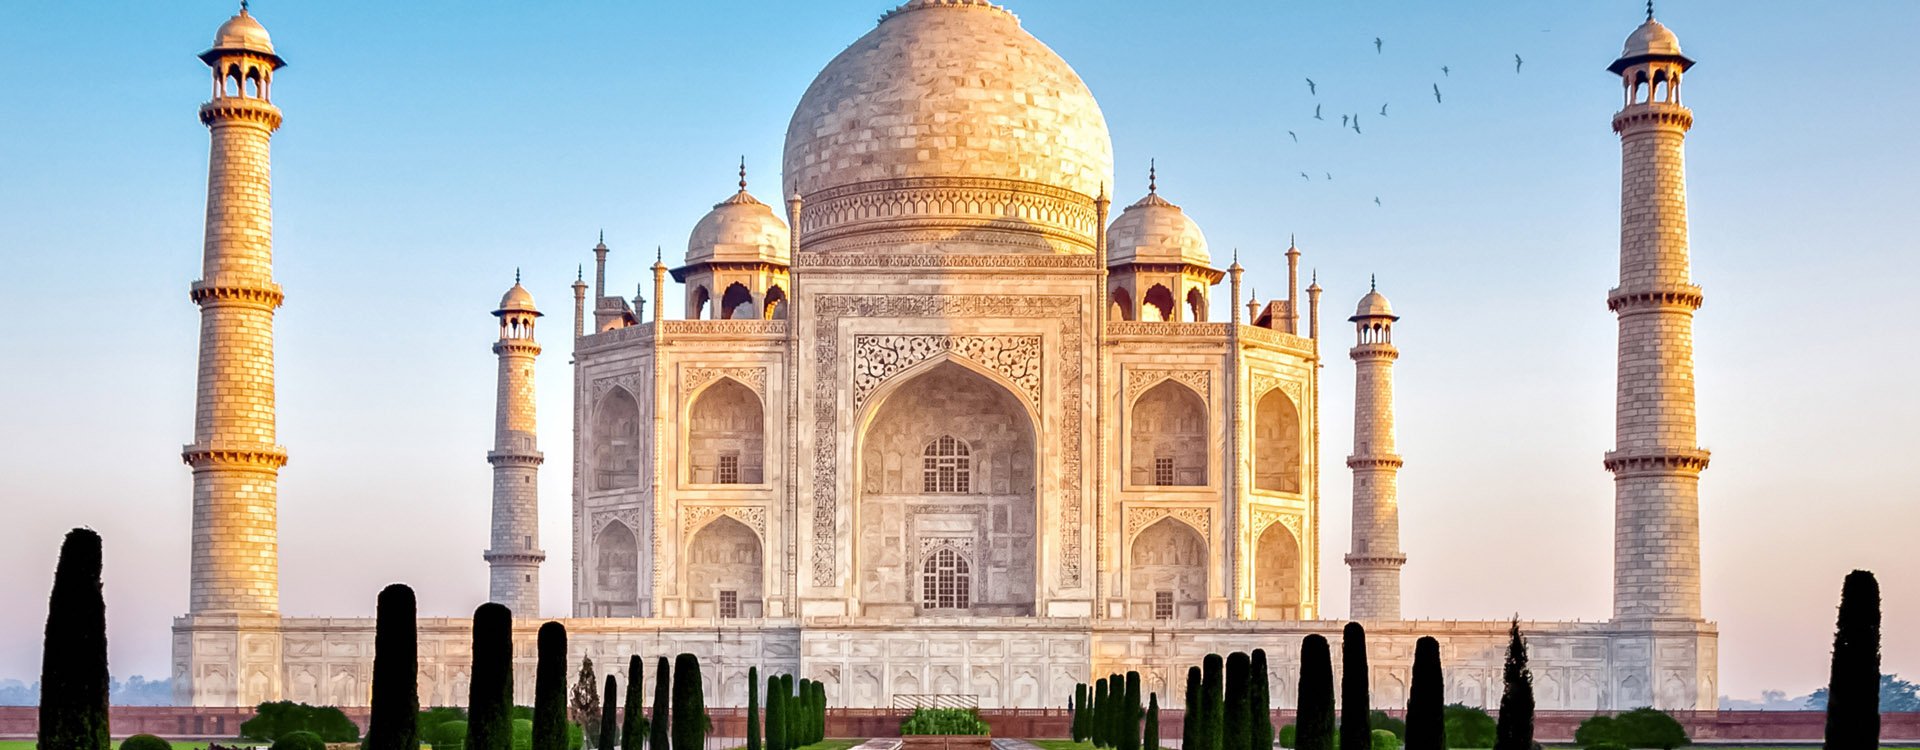 Visit the Taj Mahal on your luxury India vacation